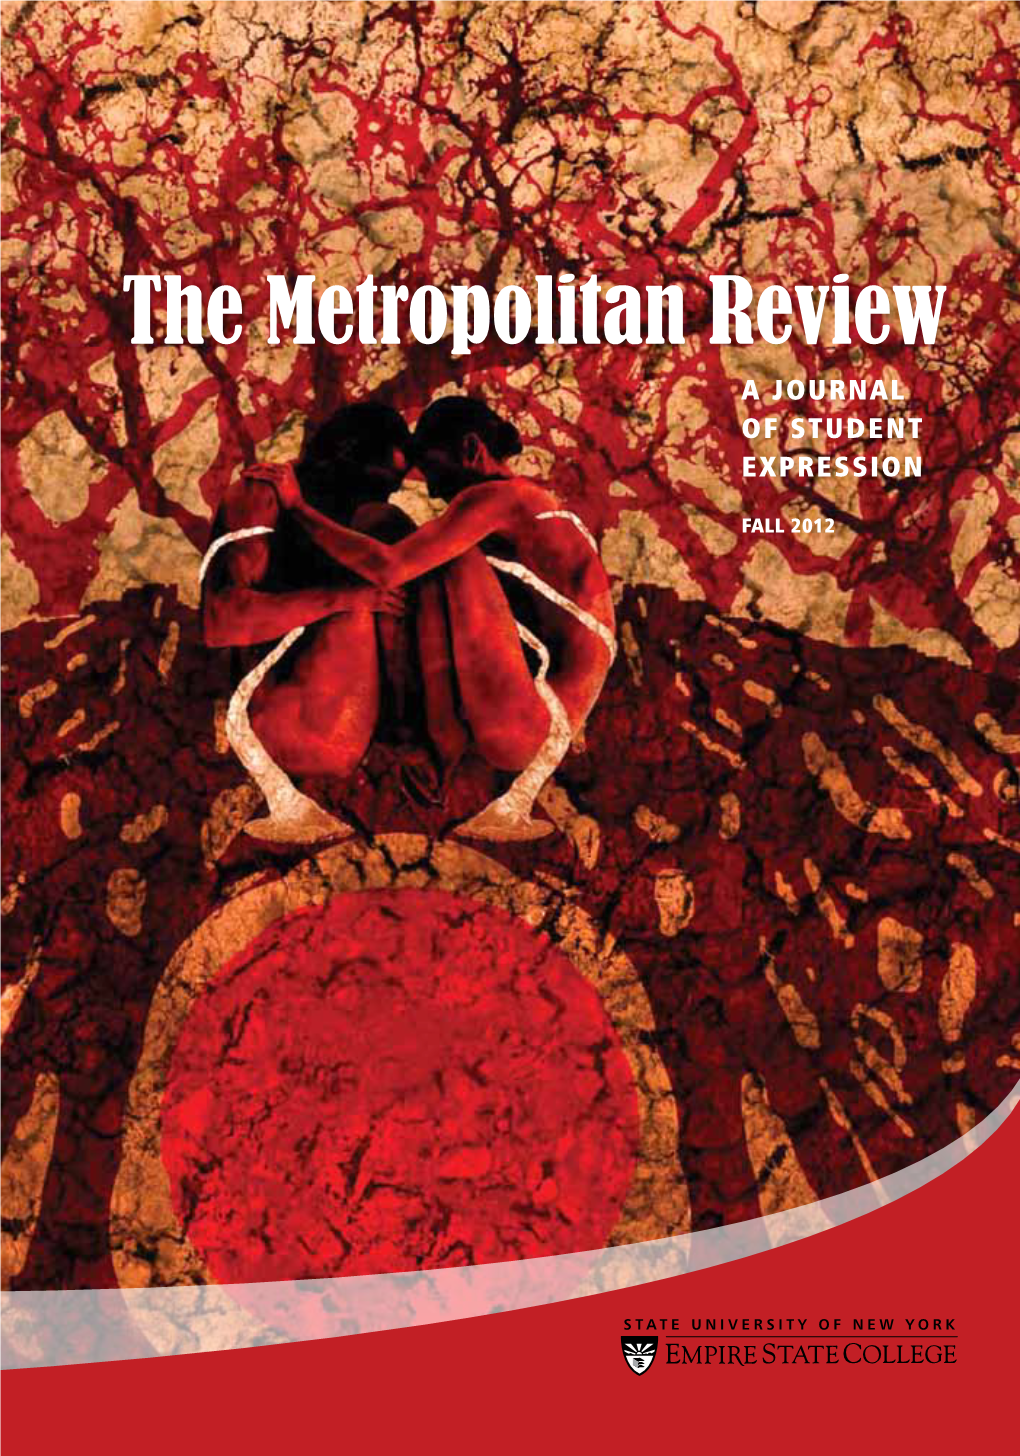 The Metropolitan Review a JOURNAL of STUDENT EXPRESSION